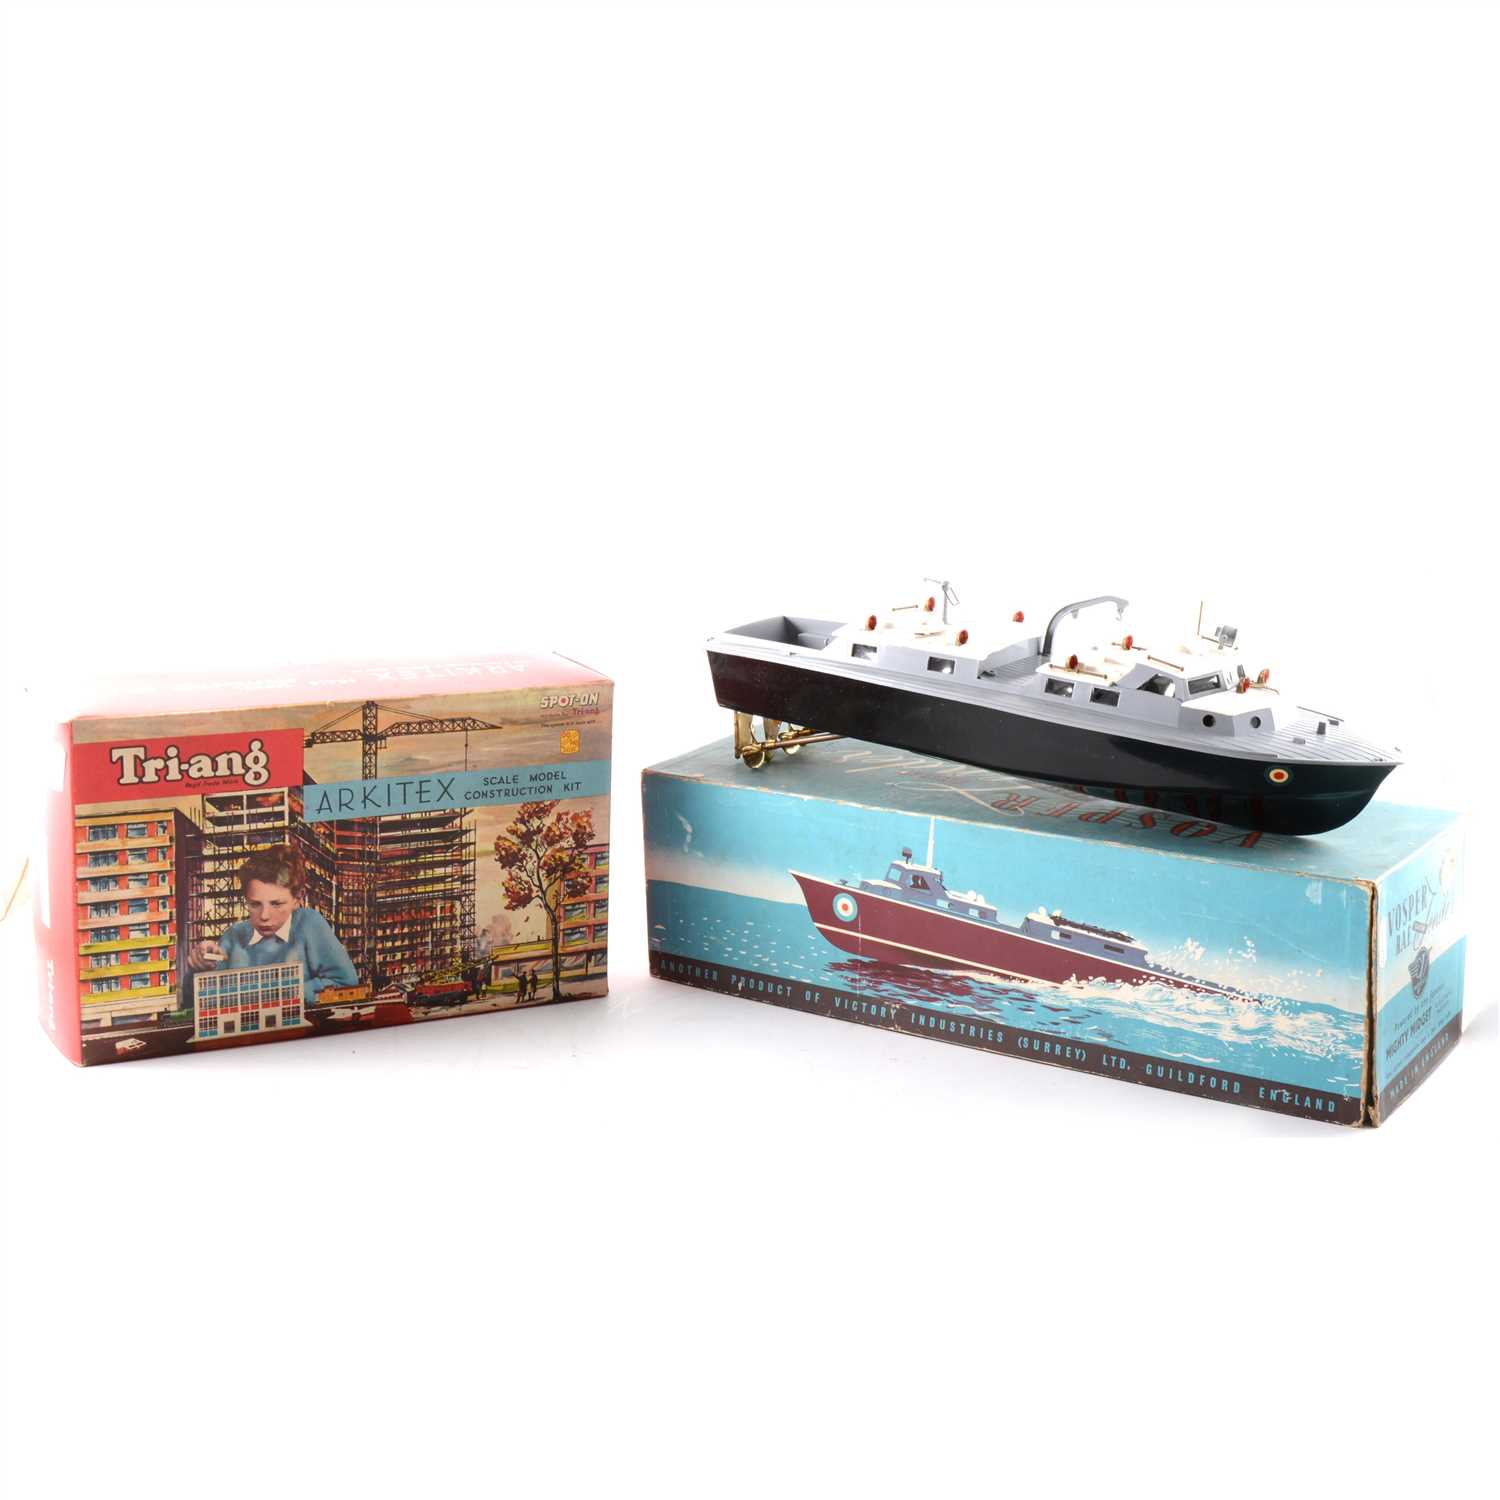 Lot 161 - Tri-ang Spot-In Arkitex set no.B, with loose parts, and a Victory Models Vosper model RAF boat, boxed.